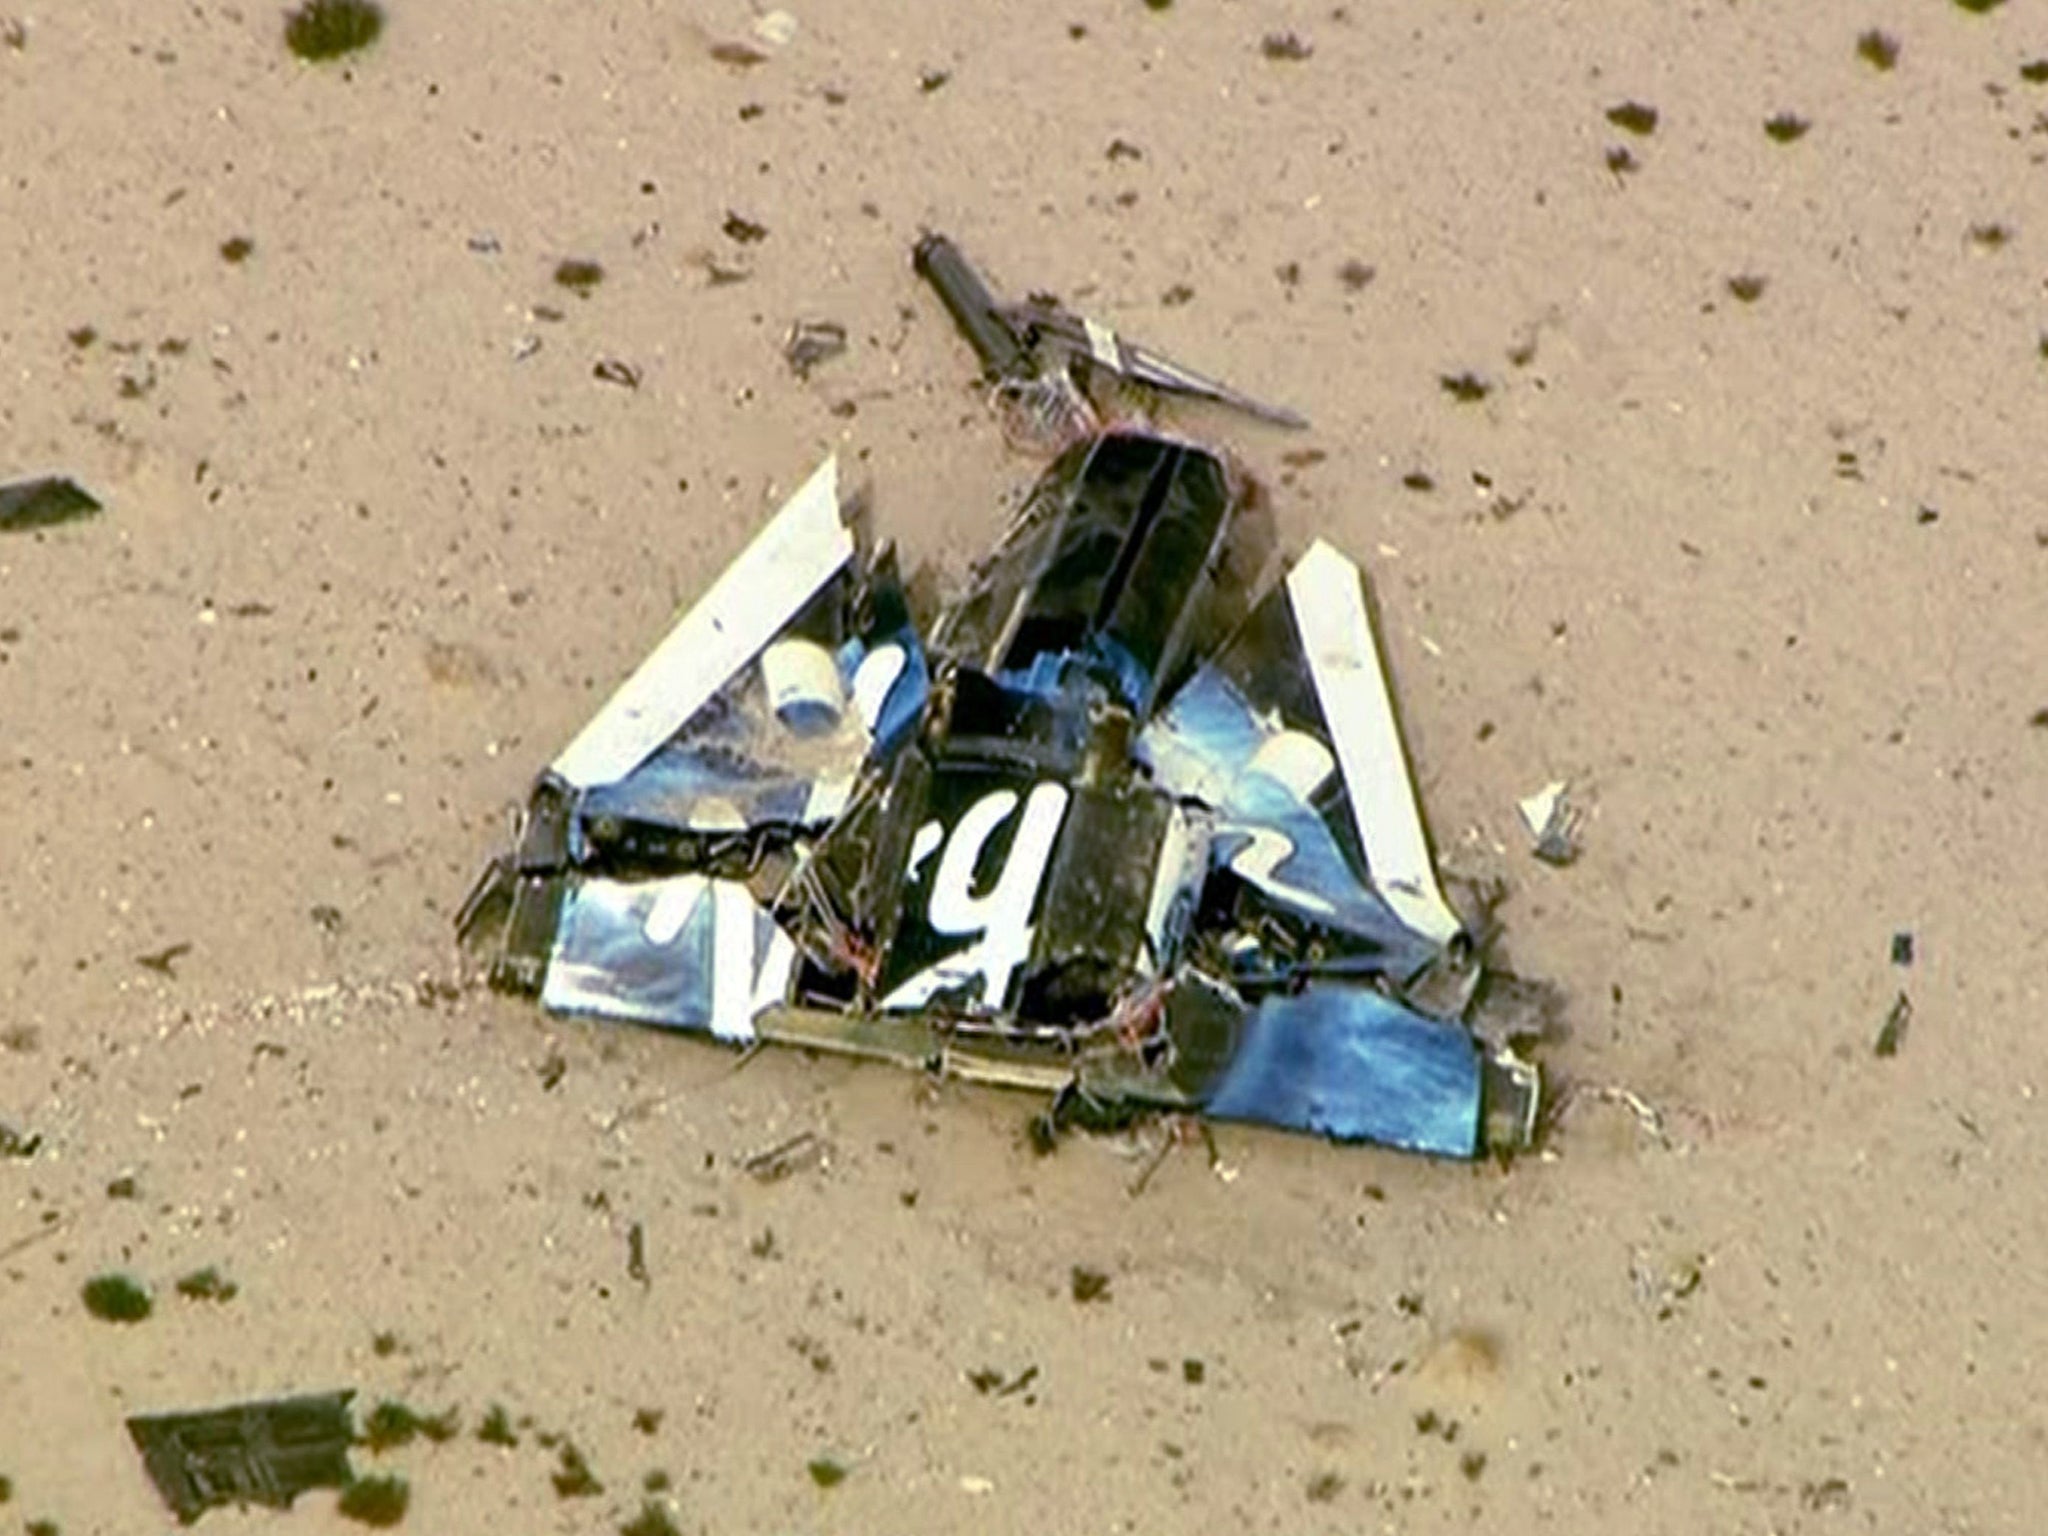 The suborbital passenger spaceship being developed by Richard Branson's Virgin Galactic crashed during a test flight on Friday at the Mojave Air and Space Port in California